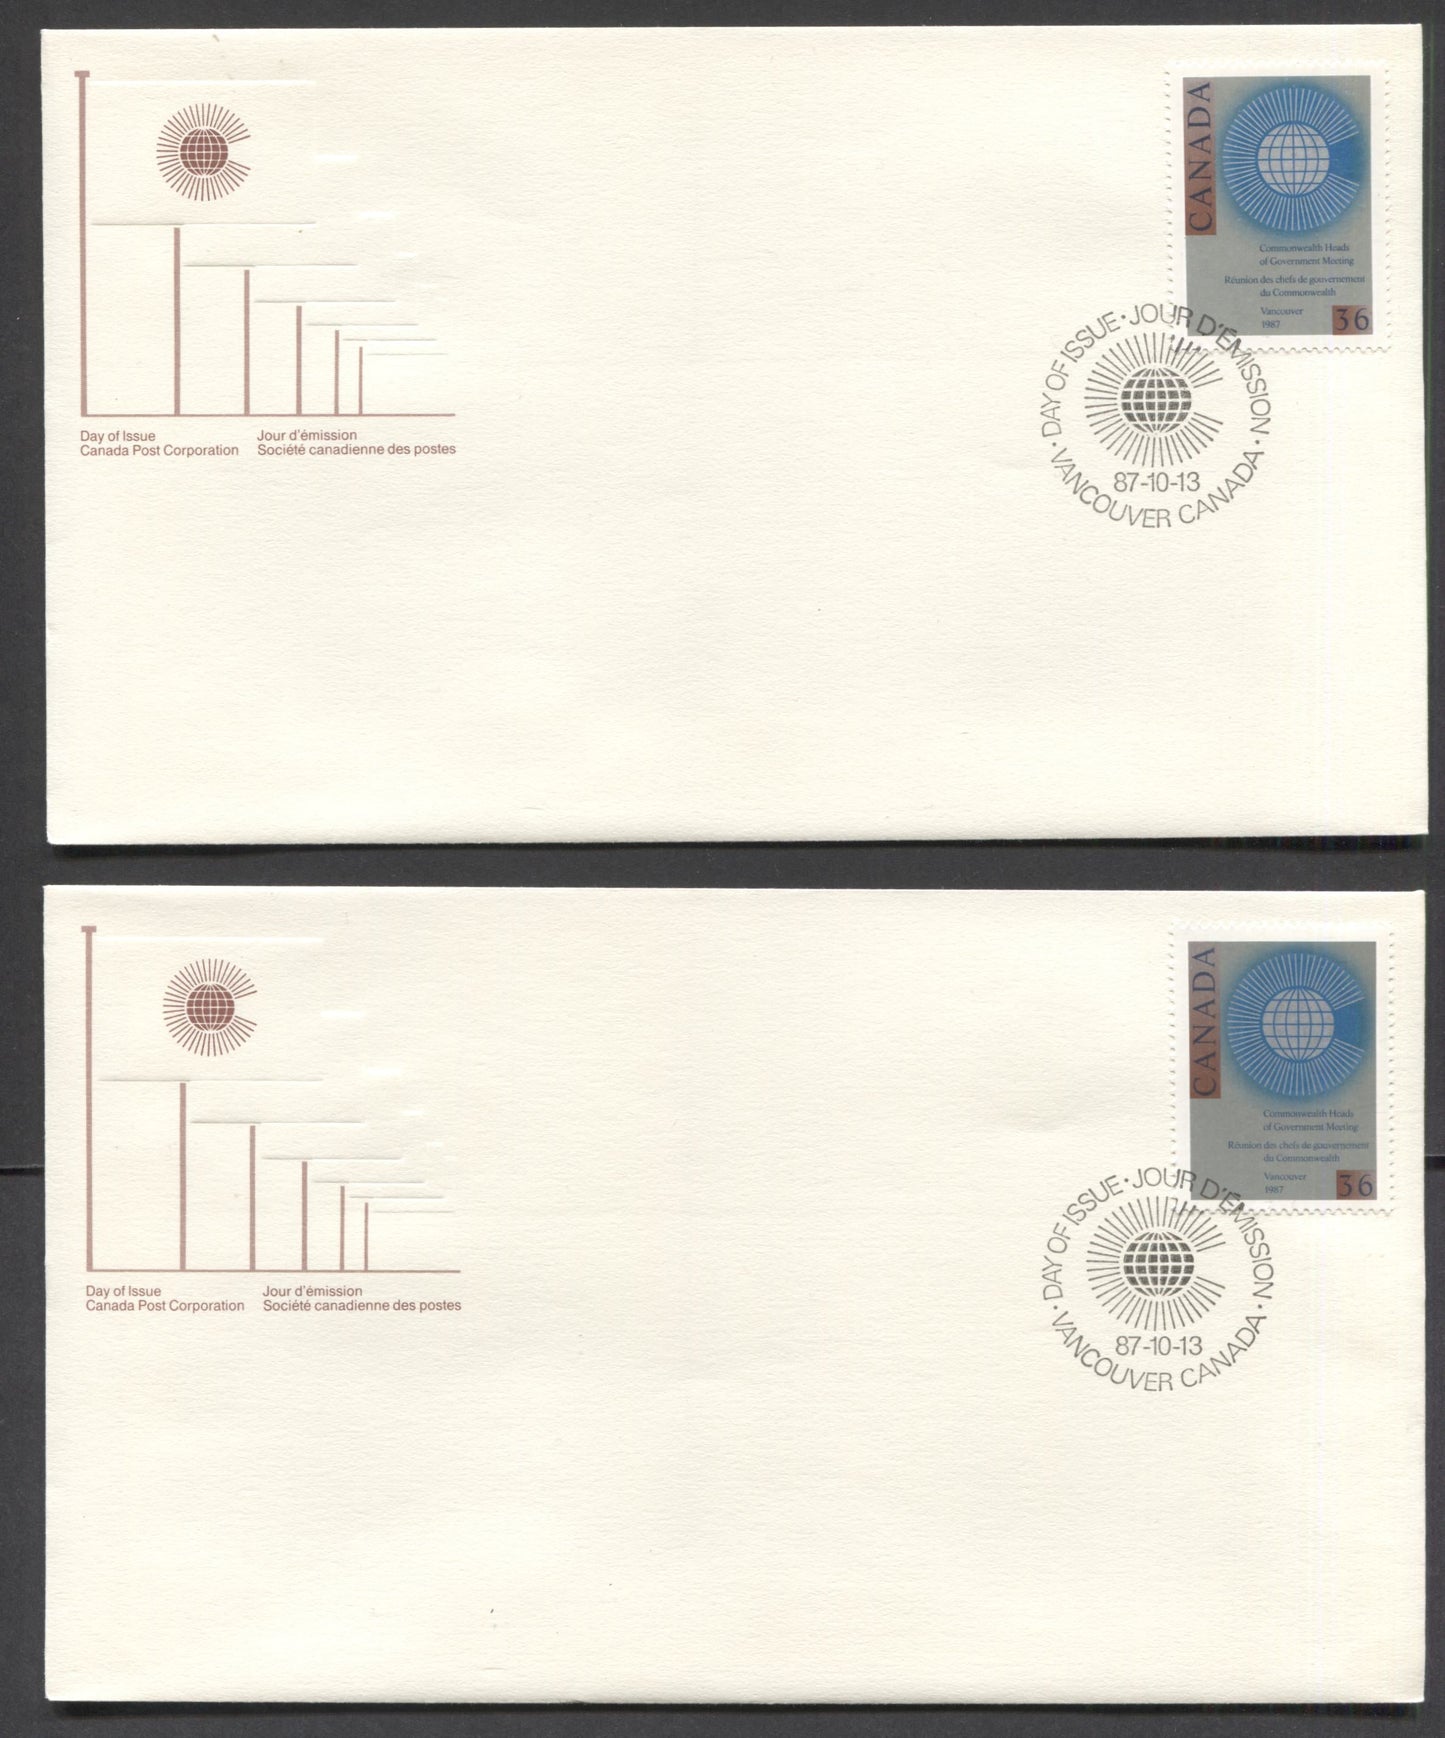 Lot 69 Canada #1145-1146, 1147-I, 1148-1150, 1152-1154, 15 Canada Post Official FDC's For the 1987  Air Canada, Quebec Summit, Commonwealth Meeting, Christmas, Football & Olympics Issues, Various Paper Fluorescences